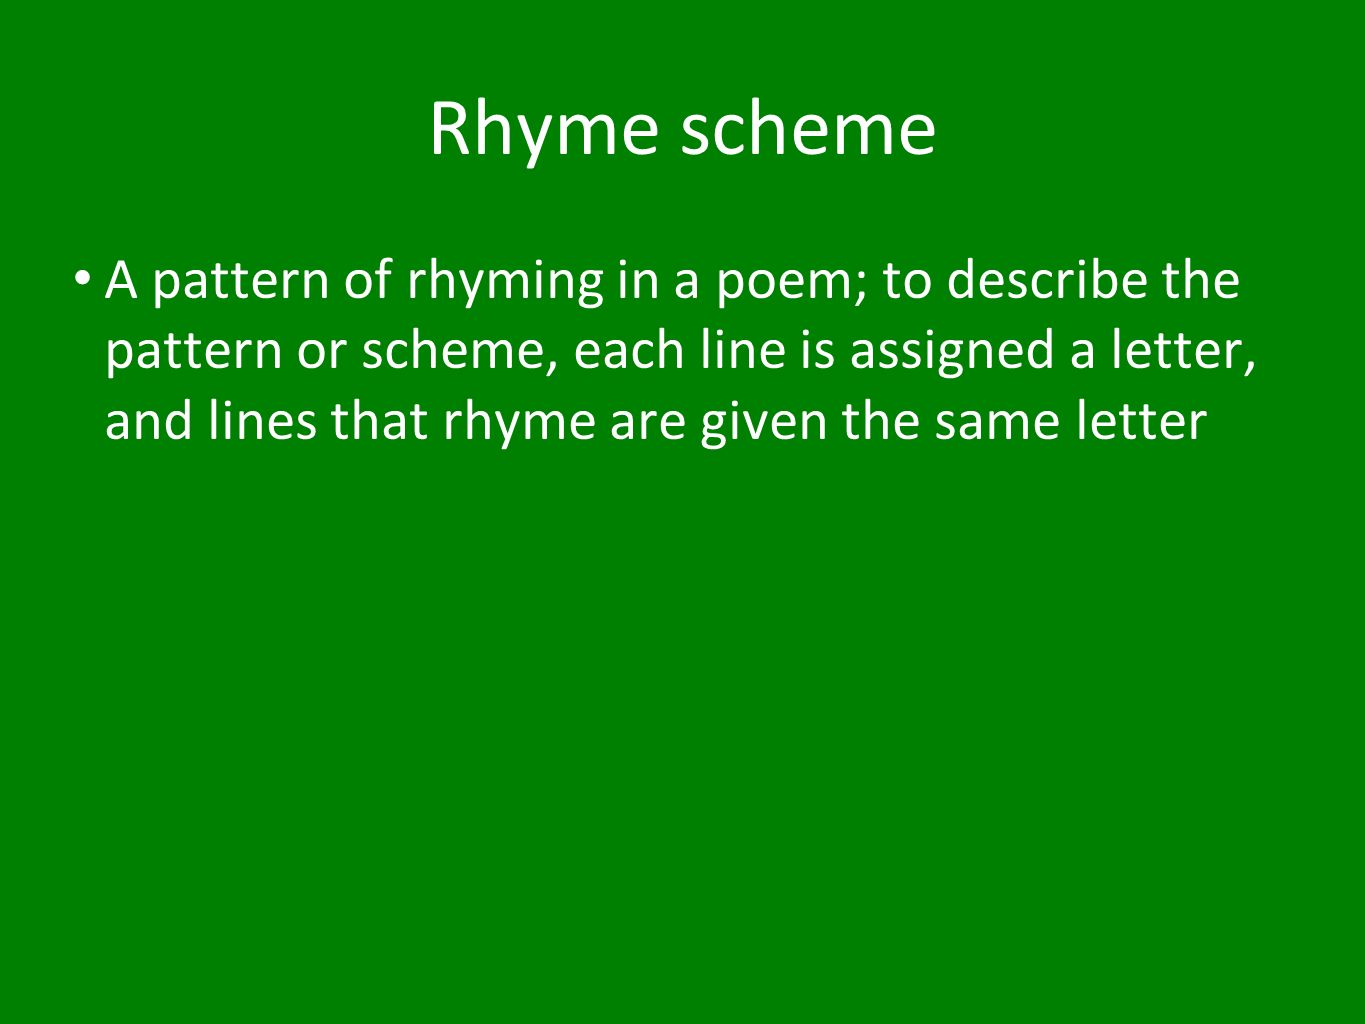 Rhyme scheme A pattern of rhyming in a poem; to describe the pattern or scheme, each line is assigned a letter, and lines that rhyme are given the same letter